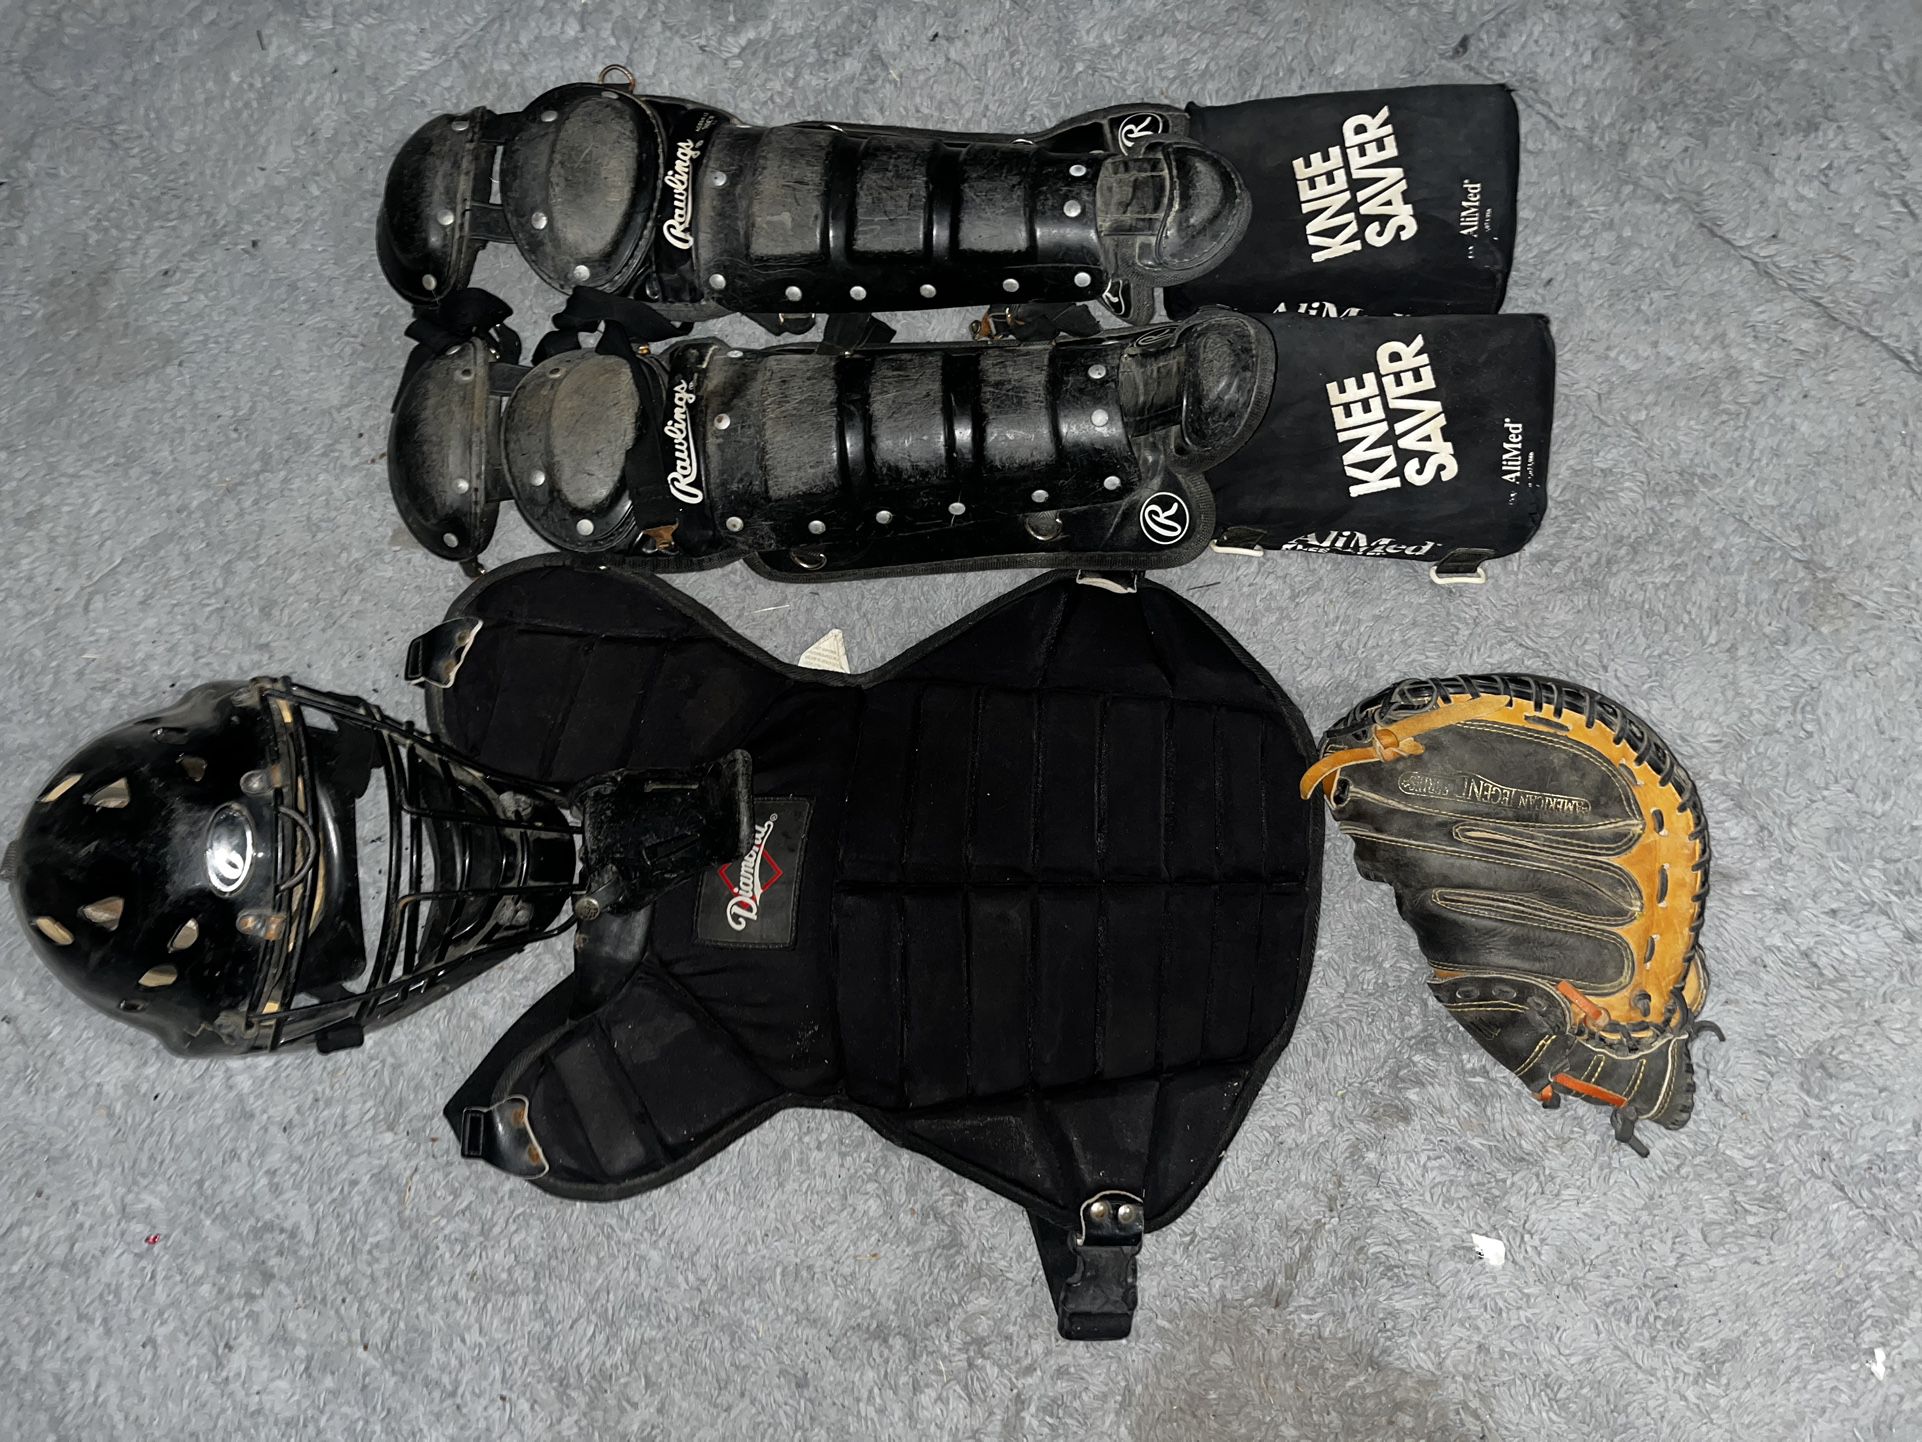 Diamond Catchers chest plate and Rawling leg covers with helmet and glove